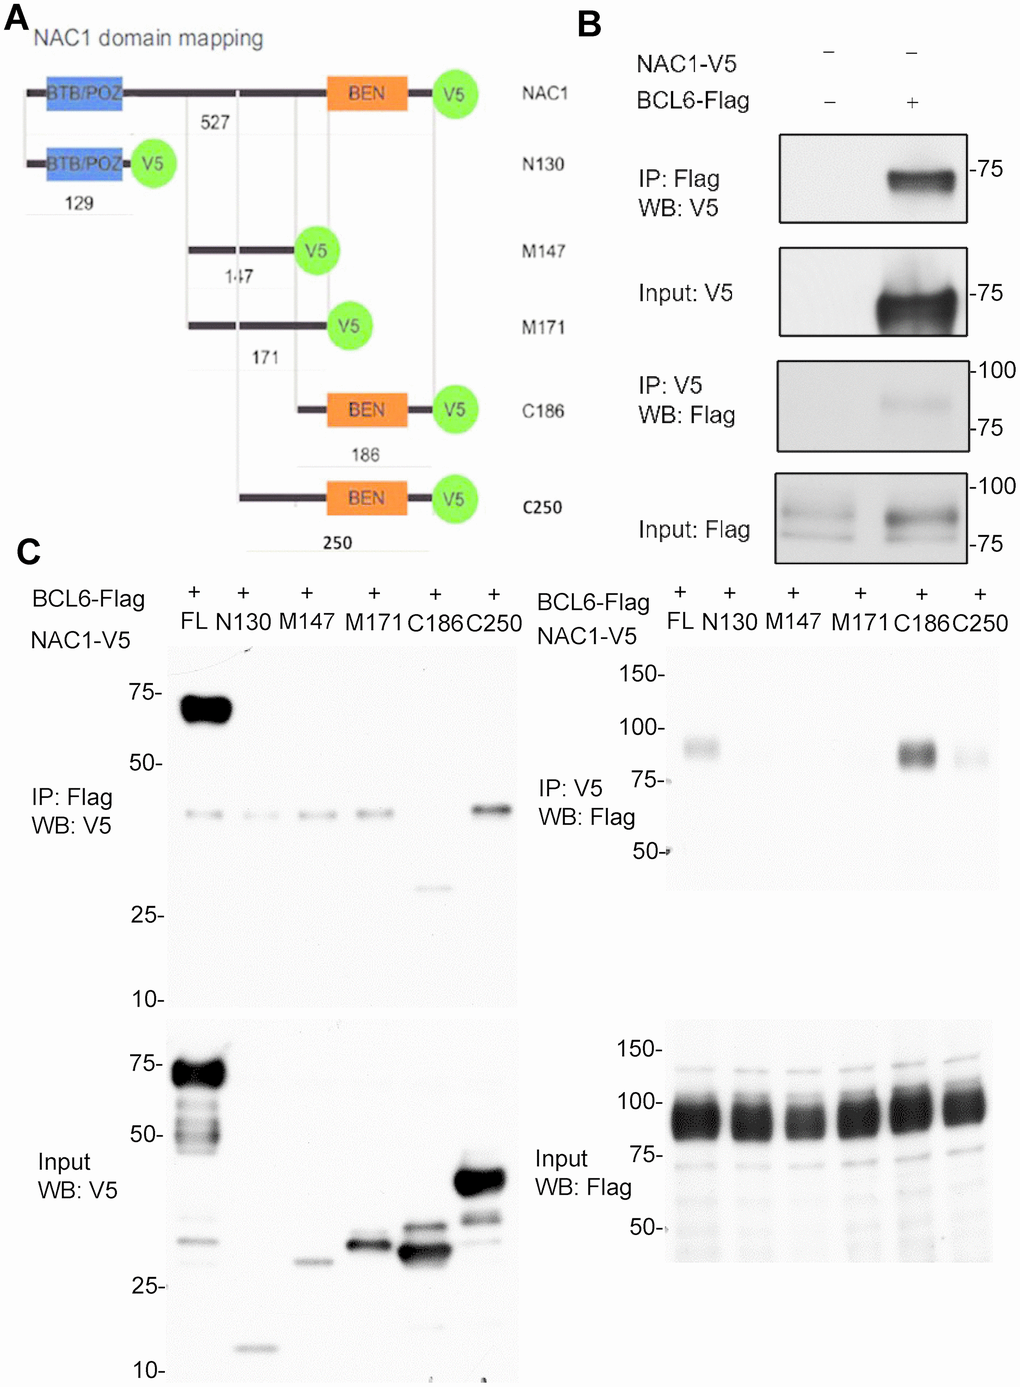 Co-immunoprecipitation (co-IP) analysis of interactions of NAC1 with BCL6. (A) Representation of the NAC1 domain mapping corresponding to the different NAC1 partial constructs used. (B) HEK293T cells were transfected with NAC1-V5 and BCL6-Flag constructs, and the lysates were collected for reciprocal protein co-IP experiments. (C) Reciprocal co-IP of full-length NAC1 and NAC1- deletion mutants with BCL6.